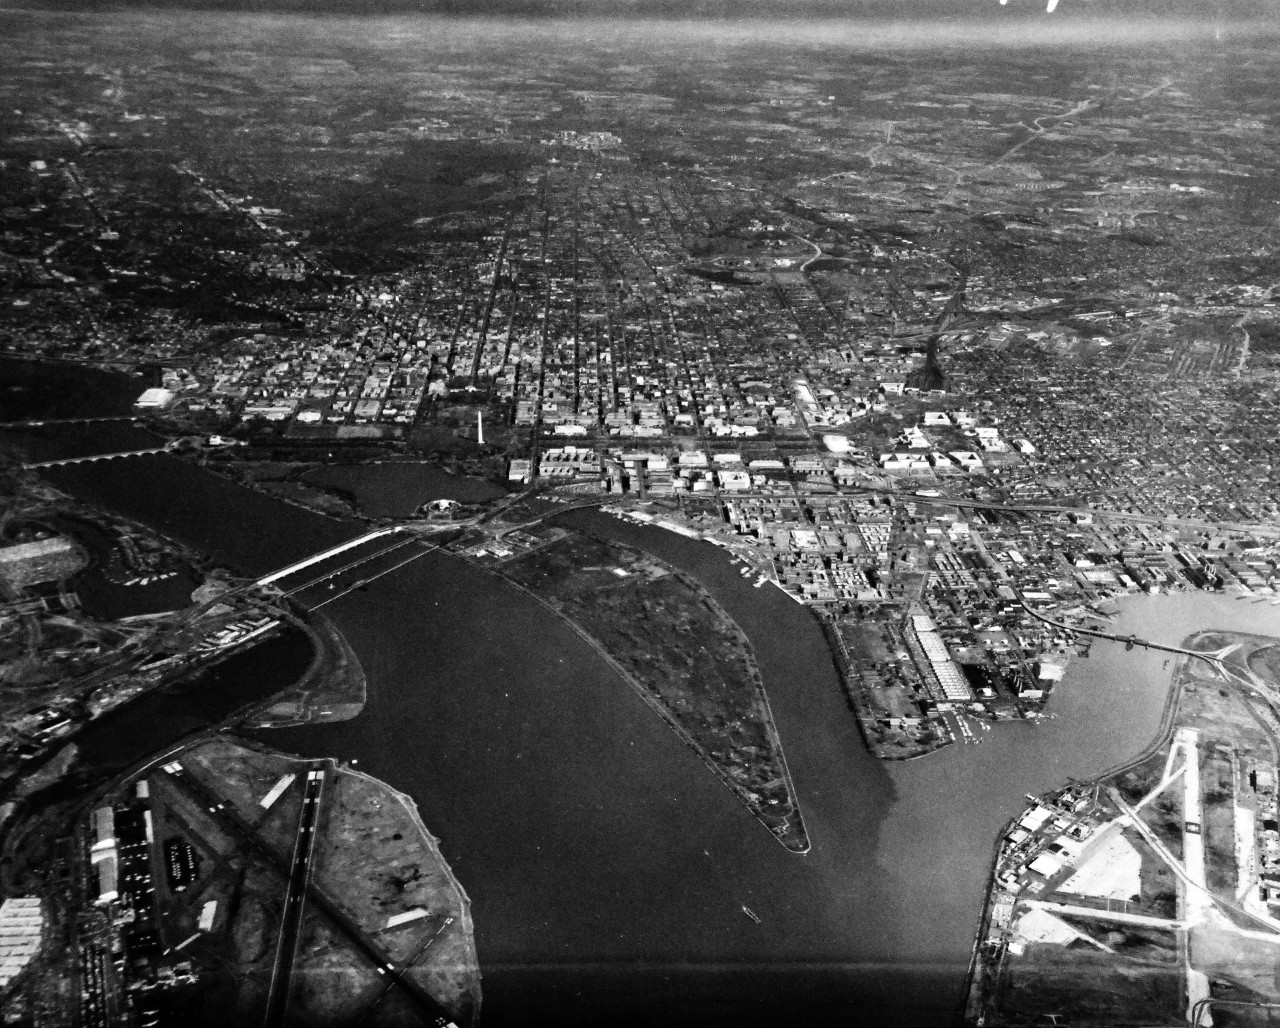 428-GX-USN-1148370:  Washington D.C., July 1971.   An aerial view of the southern portion of Washington, D.C. and the Washington National (now Ronald Reagan) Airport.  Note the Navy Yard in the upper eastern part of the photograph.   Photographed by PHC Tommy Cobb, July 1971.  U.S. Navy Photograph now in the collections of the National Archives. 